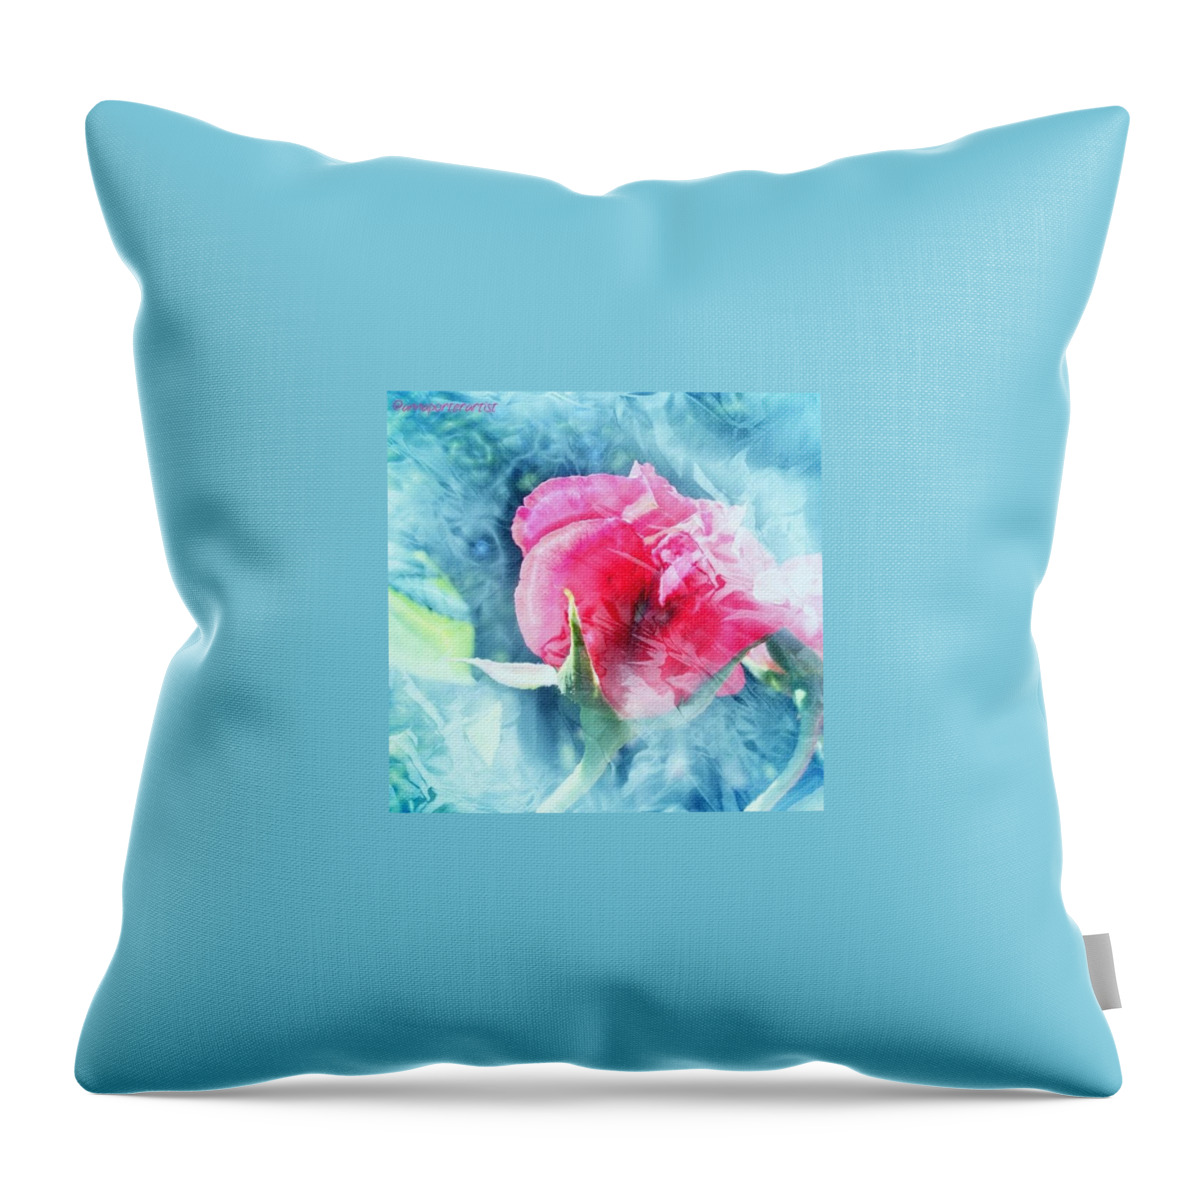 Pink Throw Pillow featuring the photograph Frozen In Time by Anna Porter